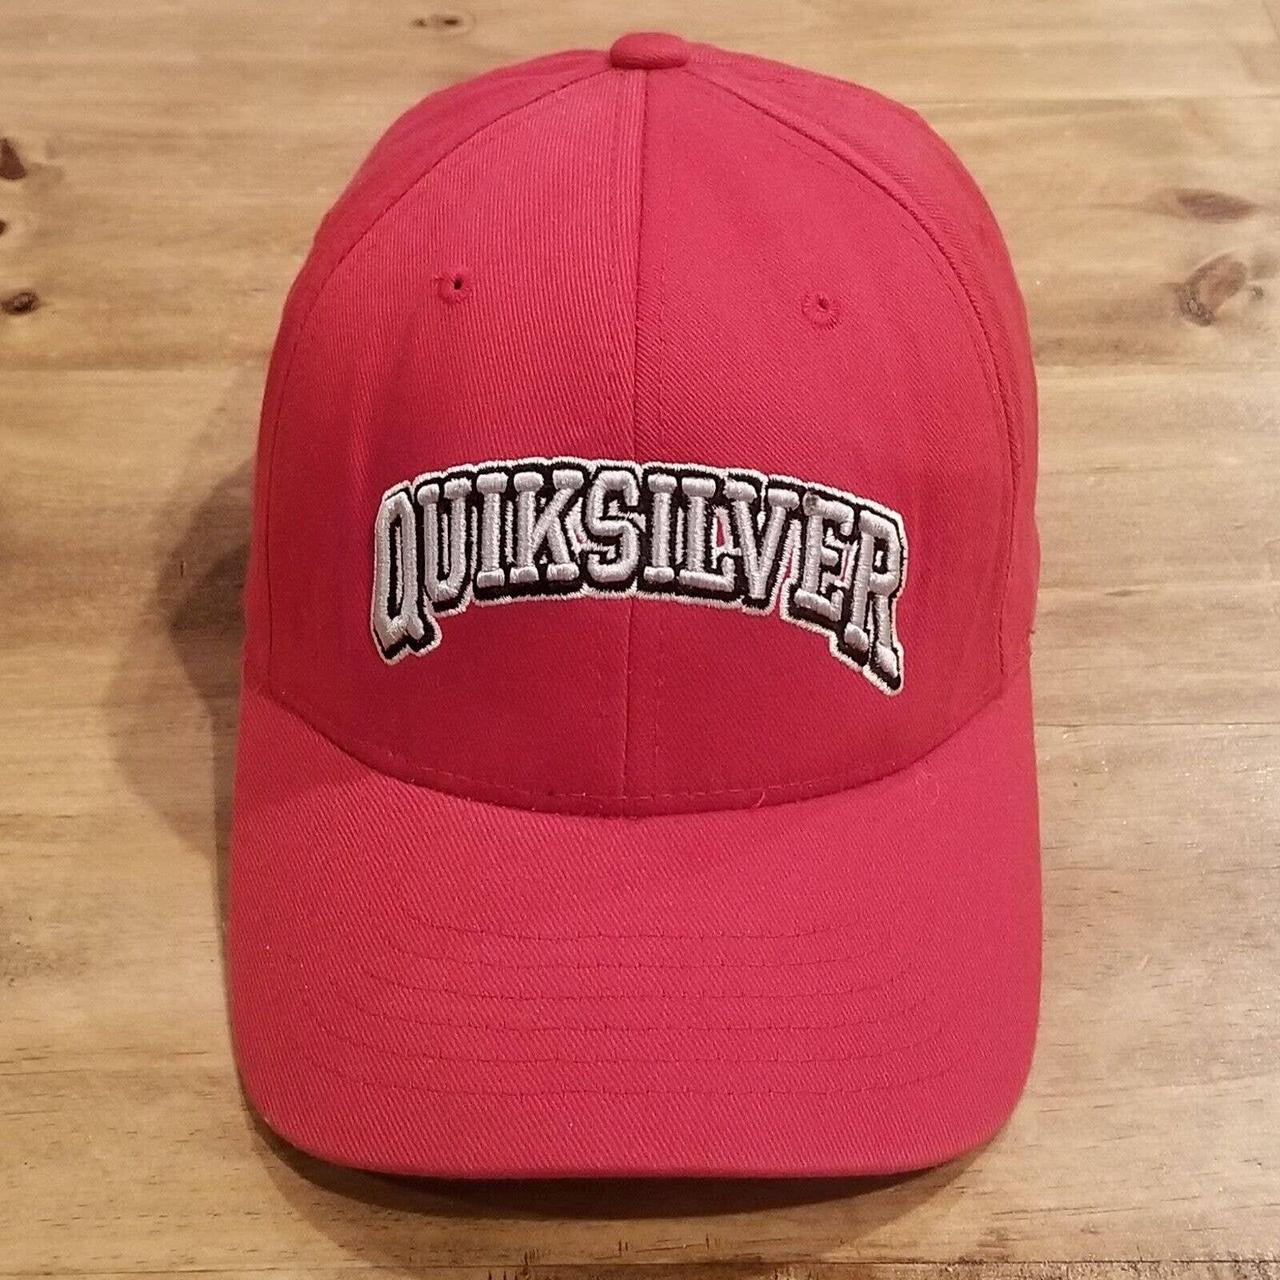 QuikSilver Hat Cap One Size Spell Depop Flex... Red Out 